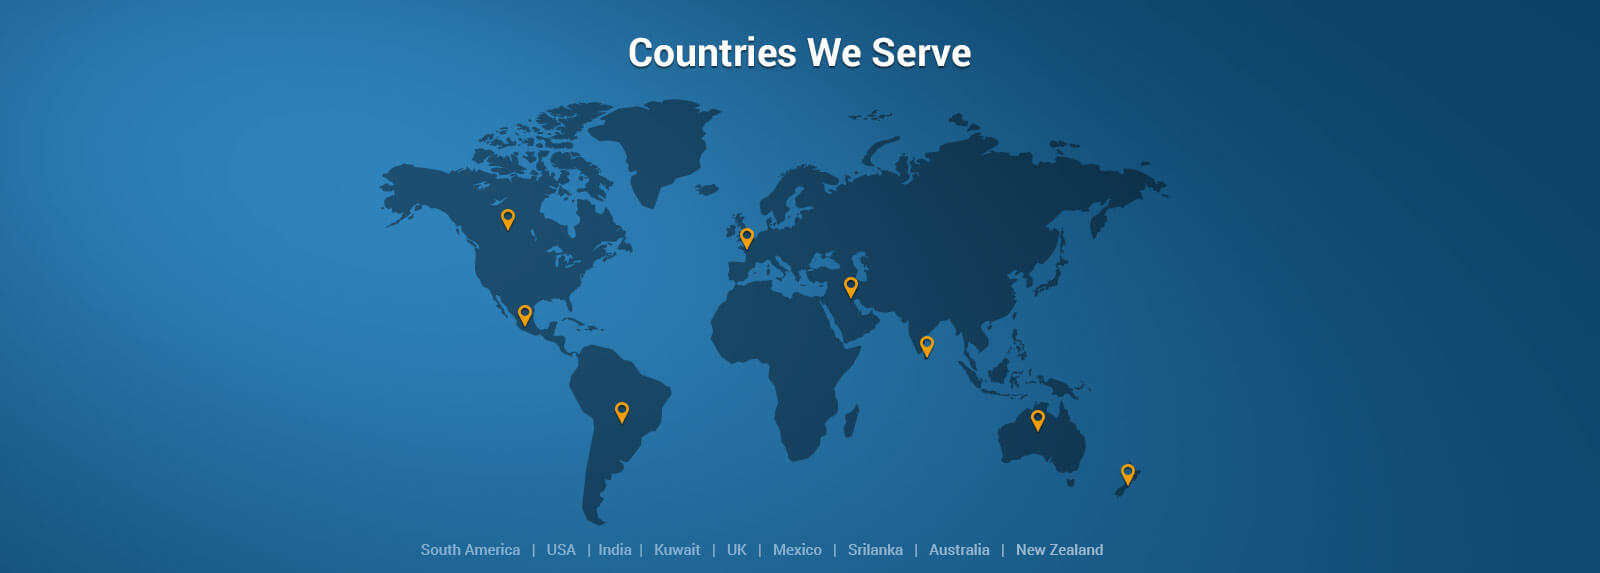 Countries We Serve